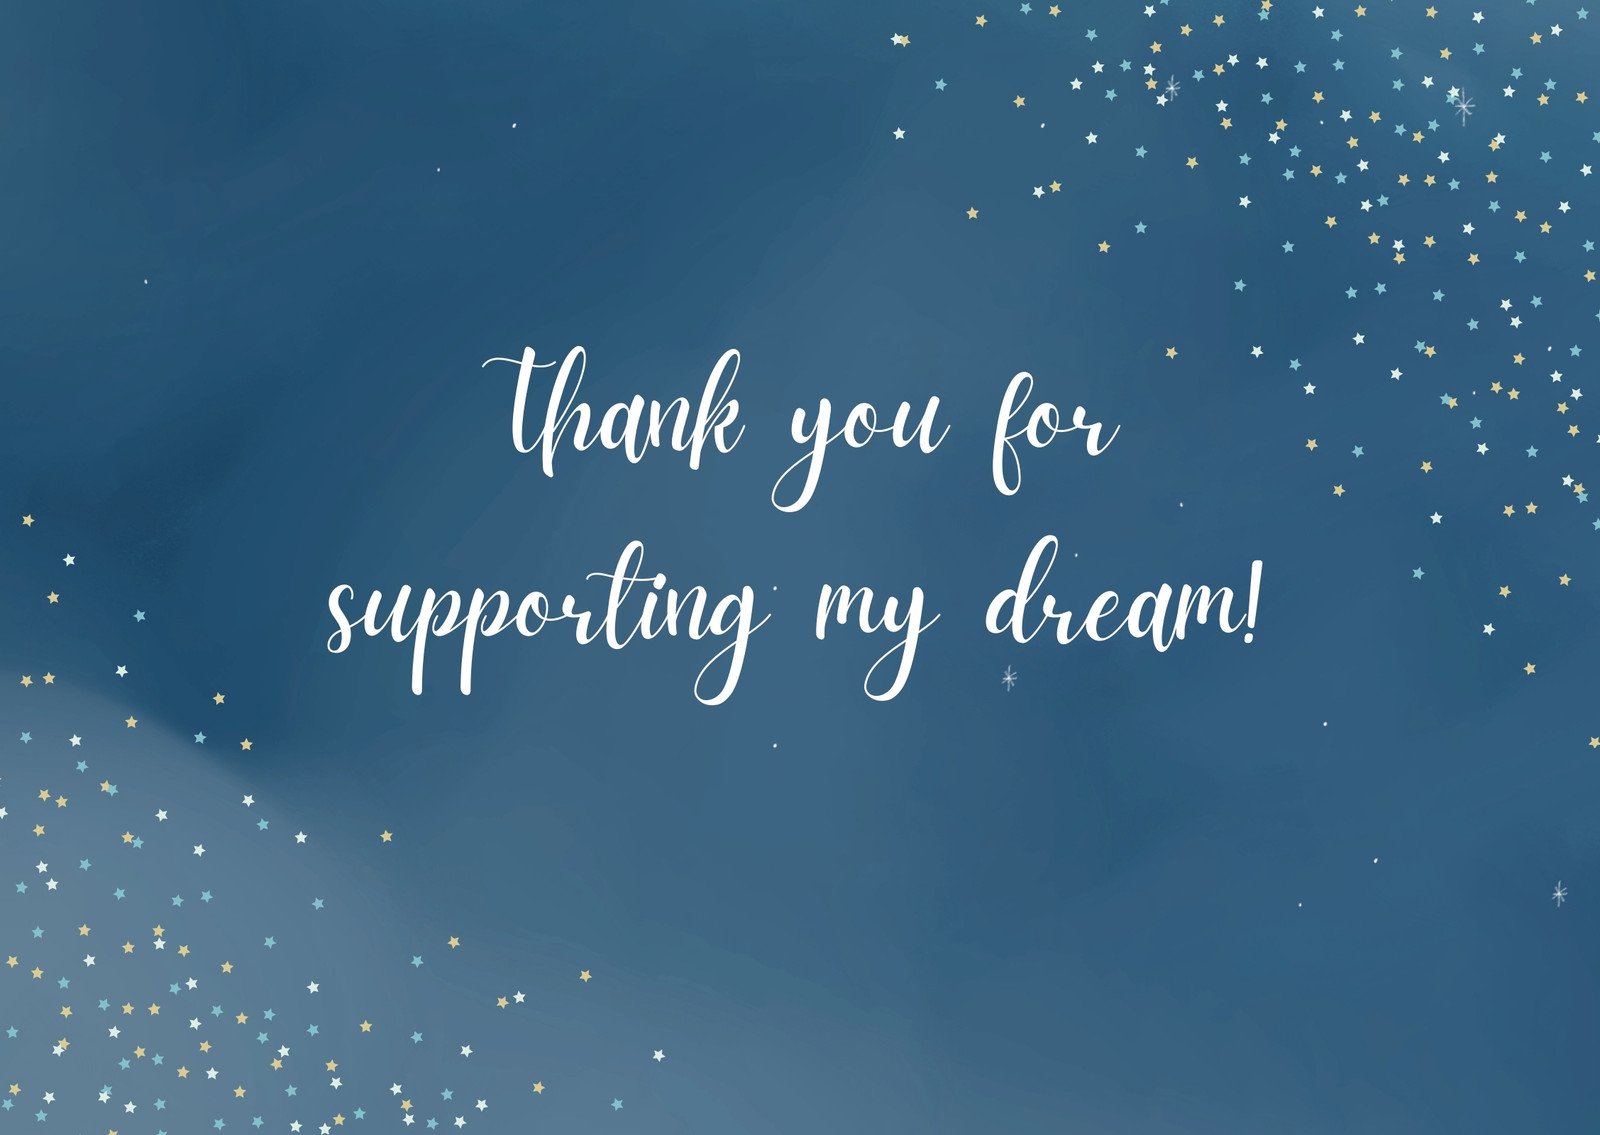 Xxx Bfhd 8 - Page 3 - Free printable business Thank You postcard templates | Canva